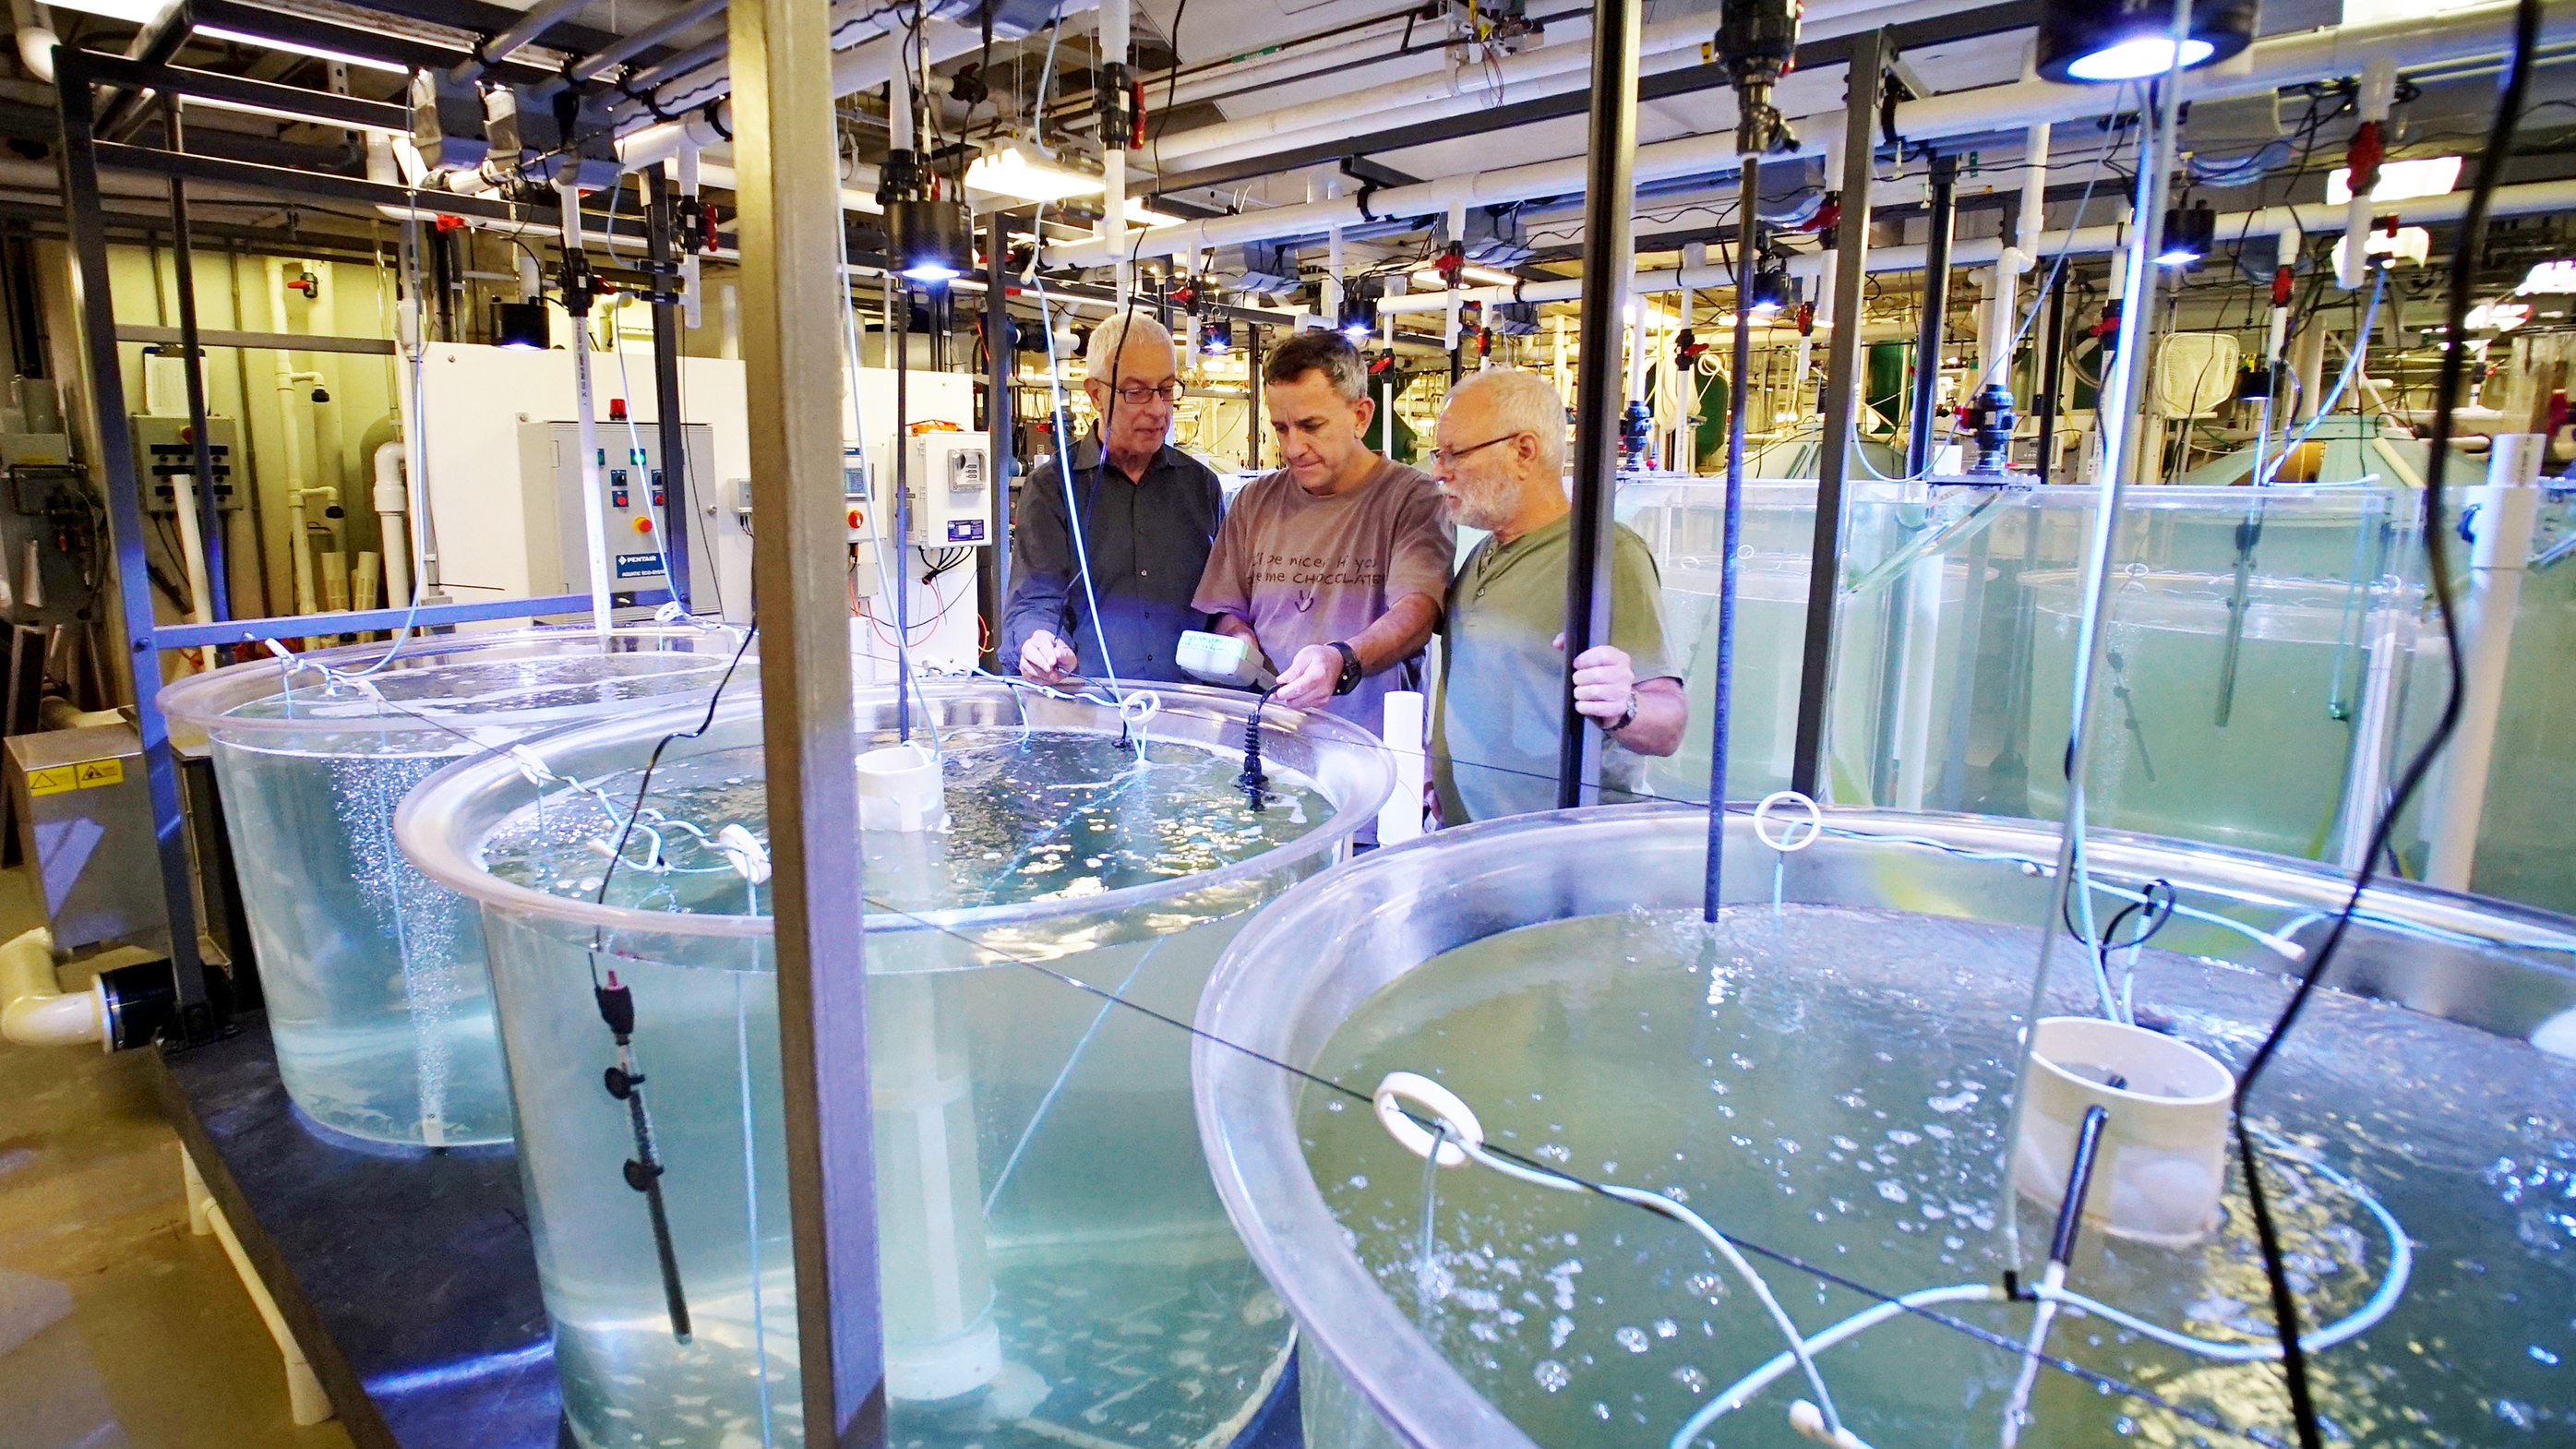 Yonathan Zohar, Jorge Gomezjurado and Odi Zmora check on bluefin tuna larvae in tanks at the University of Maryland Baltimore County's Institute of Marine and Environmental Technology. Photo: Courtesy of Yonathan Zohar